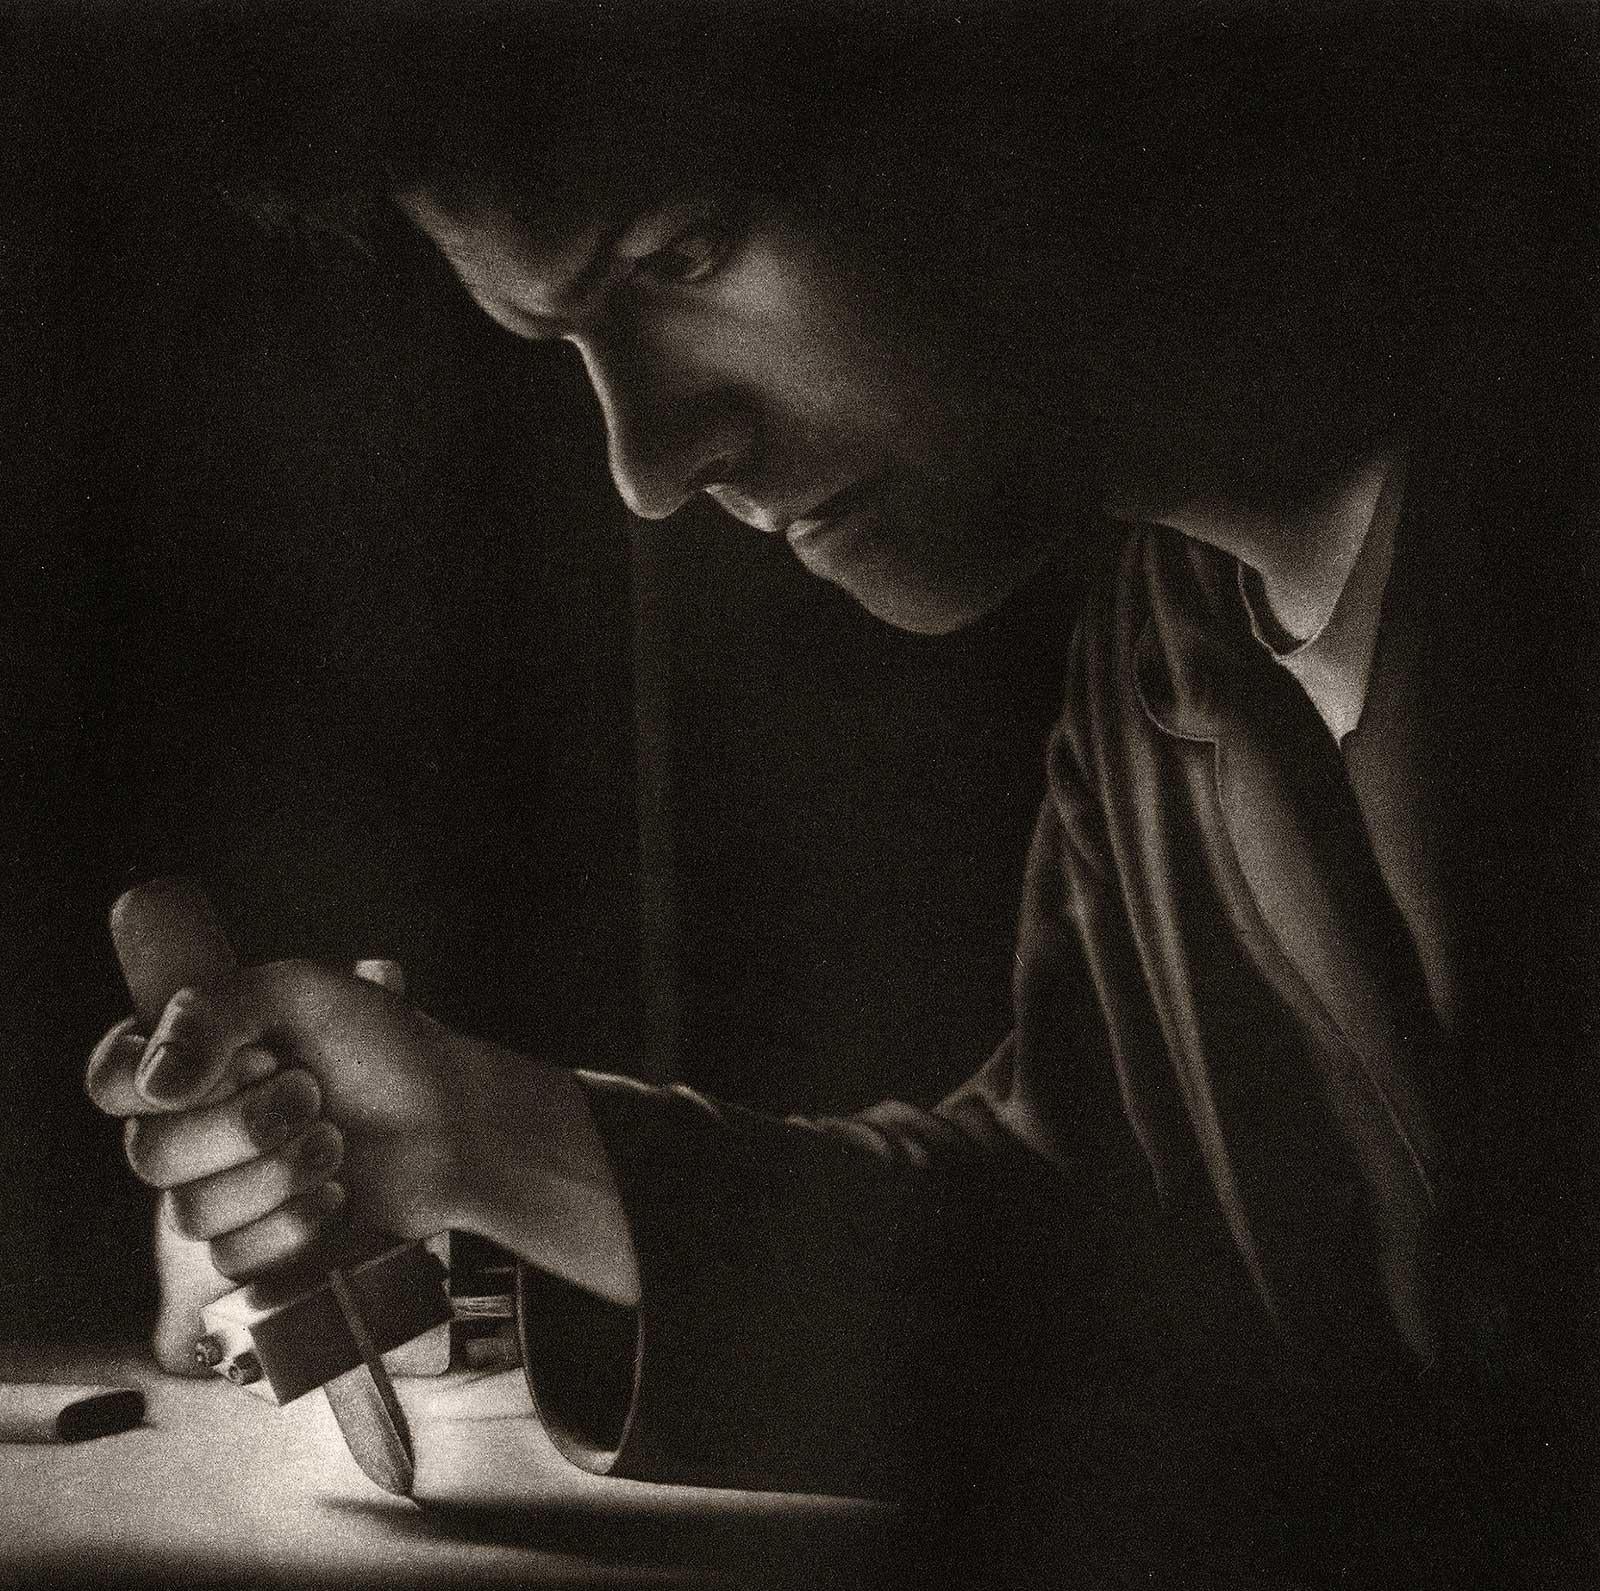 Settling II Homage to the Mezzotint (Self Portrait of Artist with his Tools) - Print by Francisco Souto